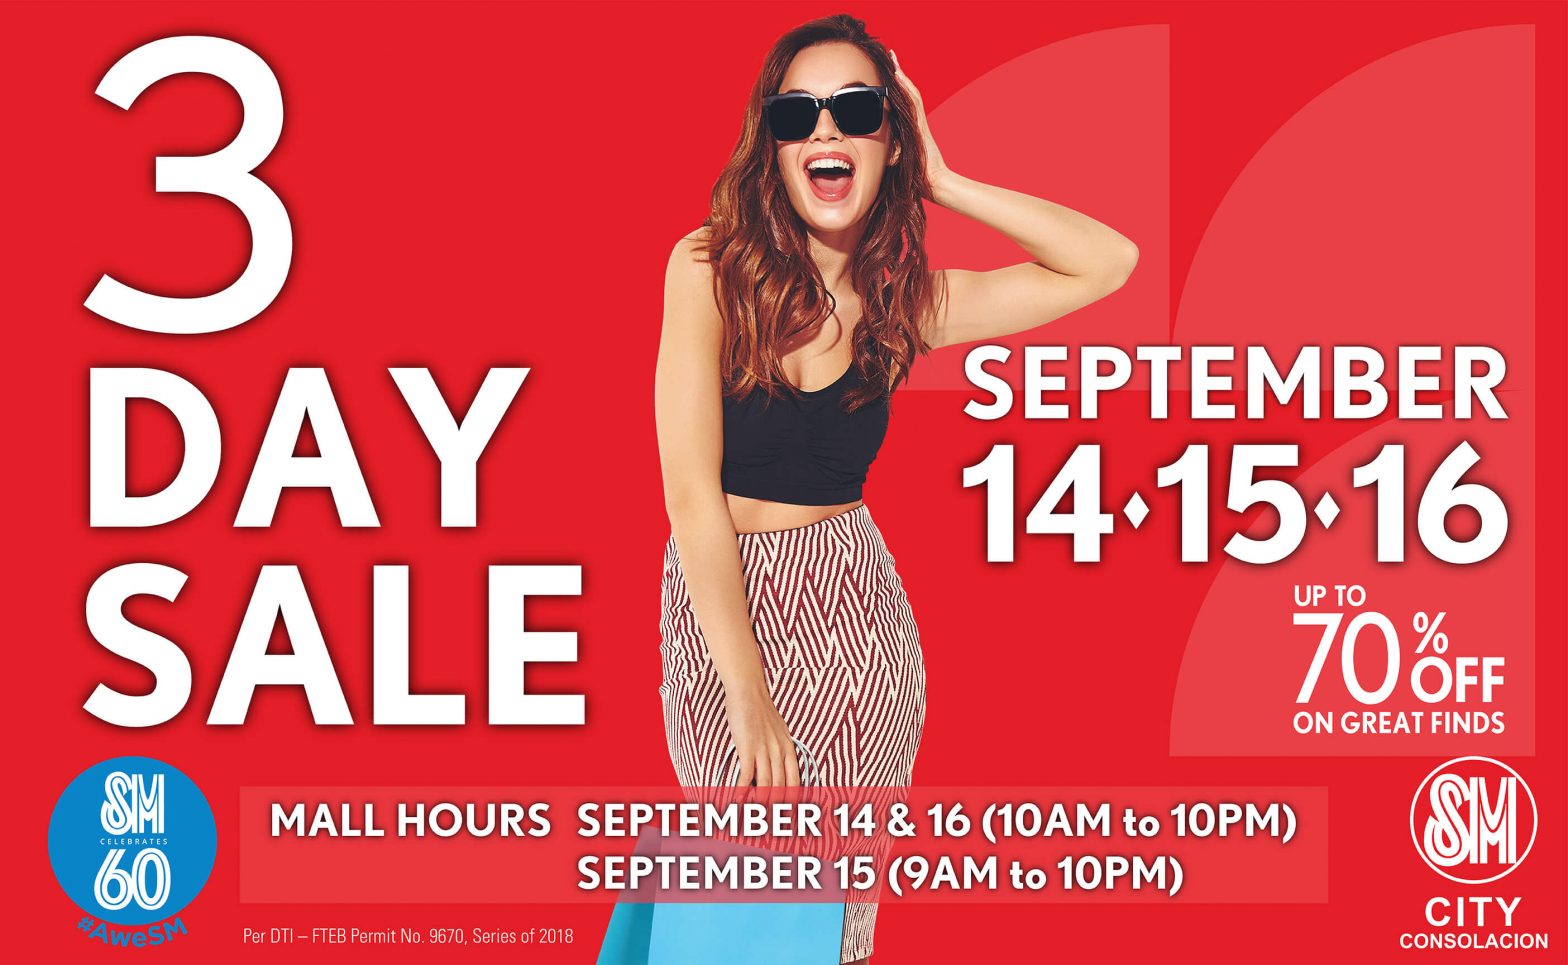 Top 3 exciting reasons why you shouldn’t miss SM City Consolacion sale